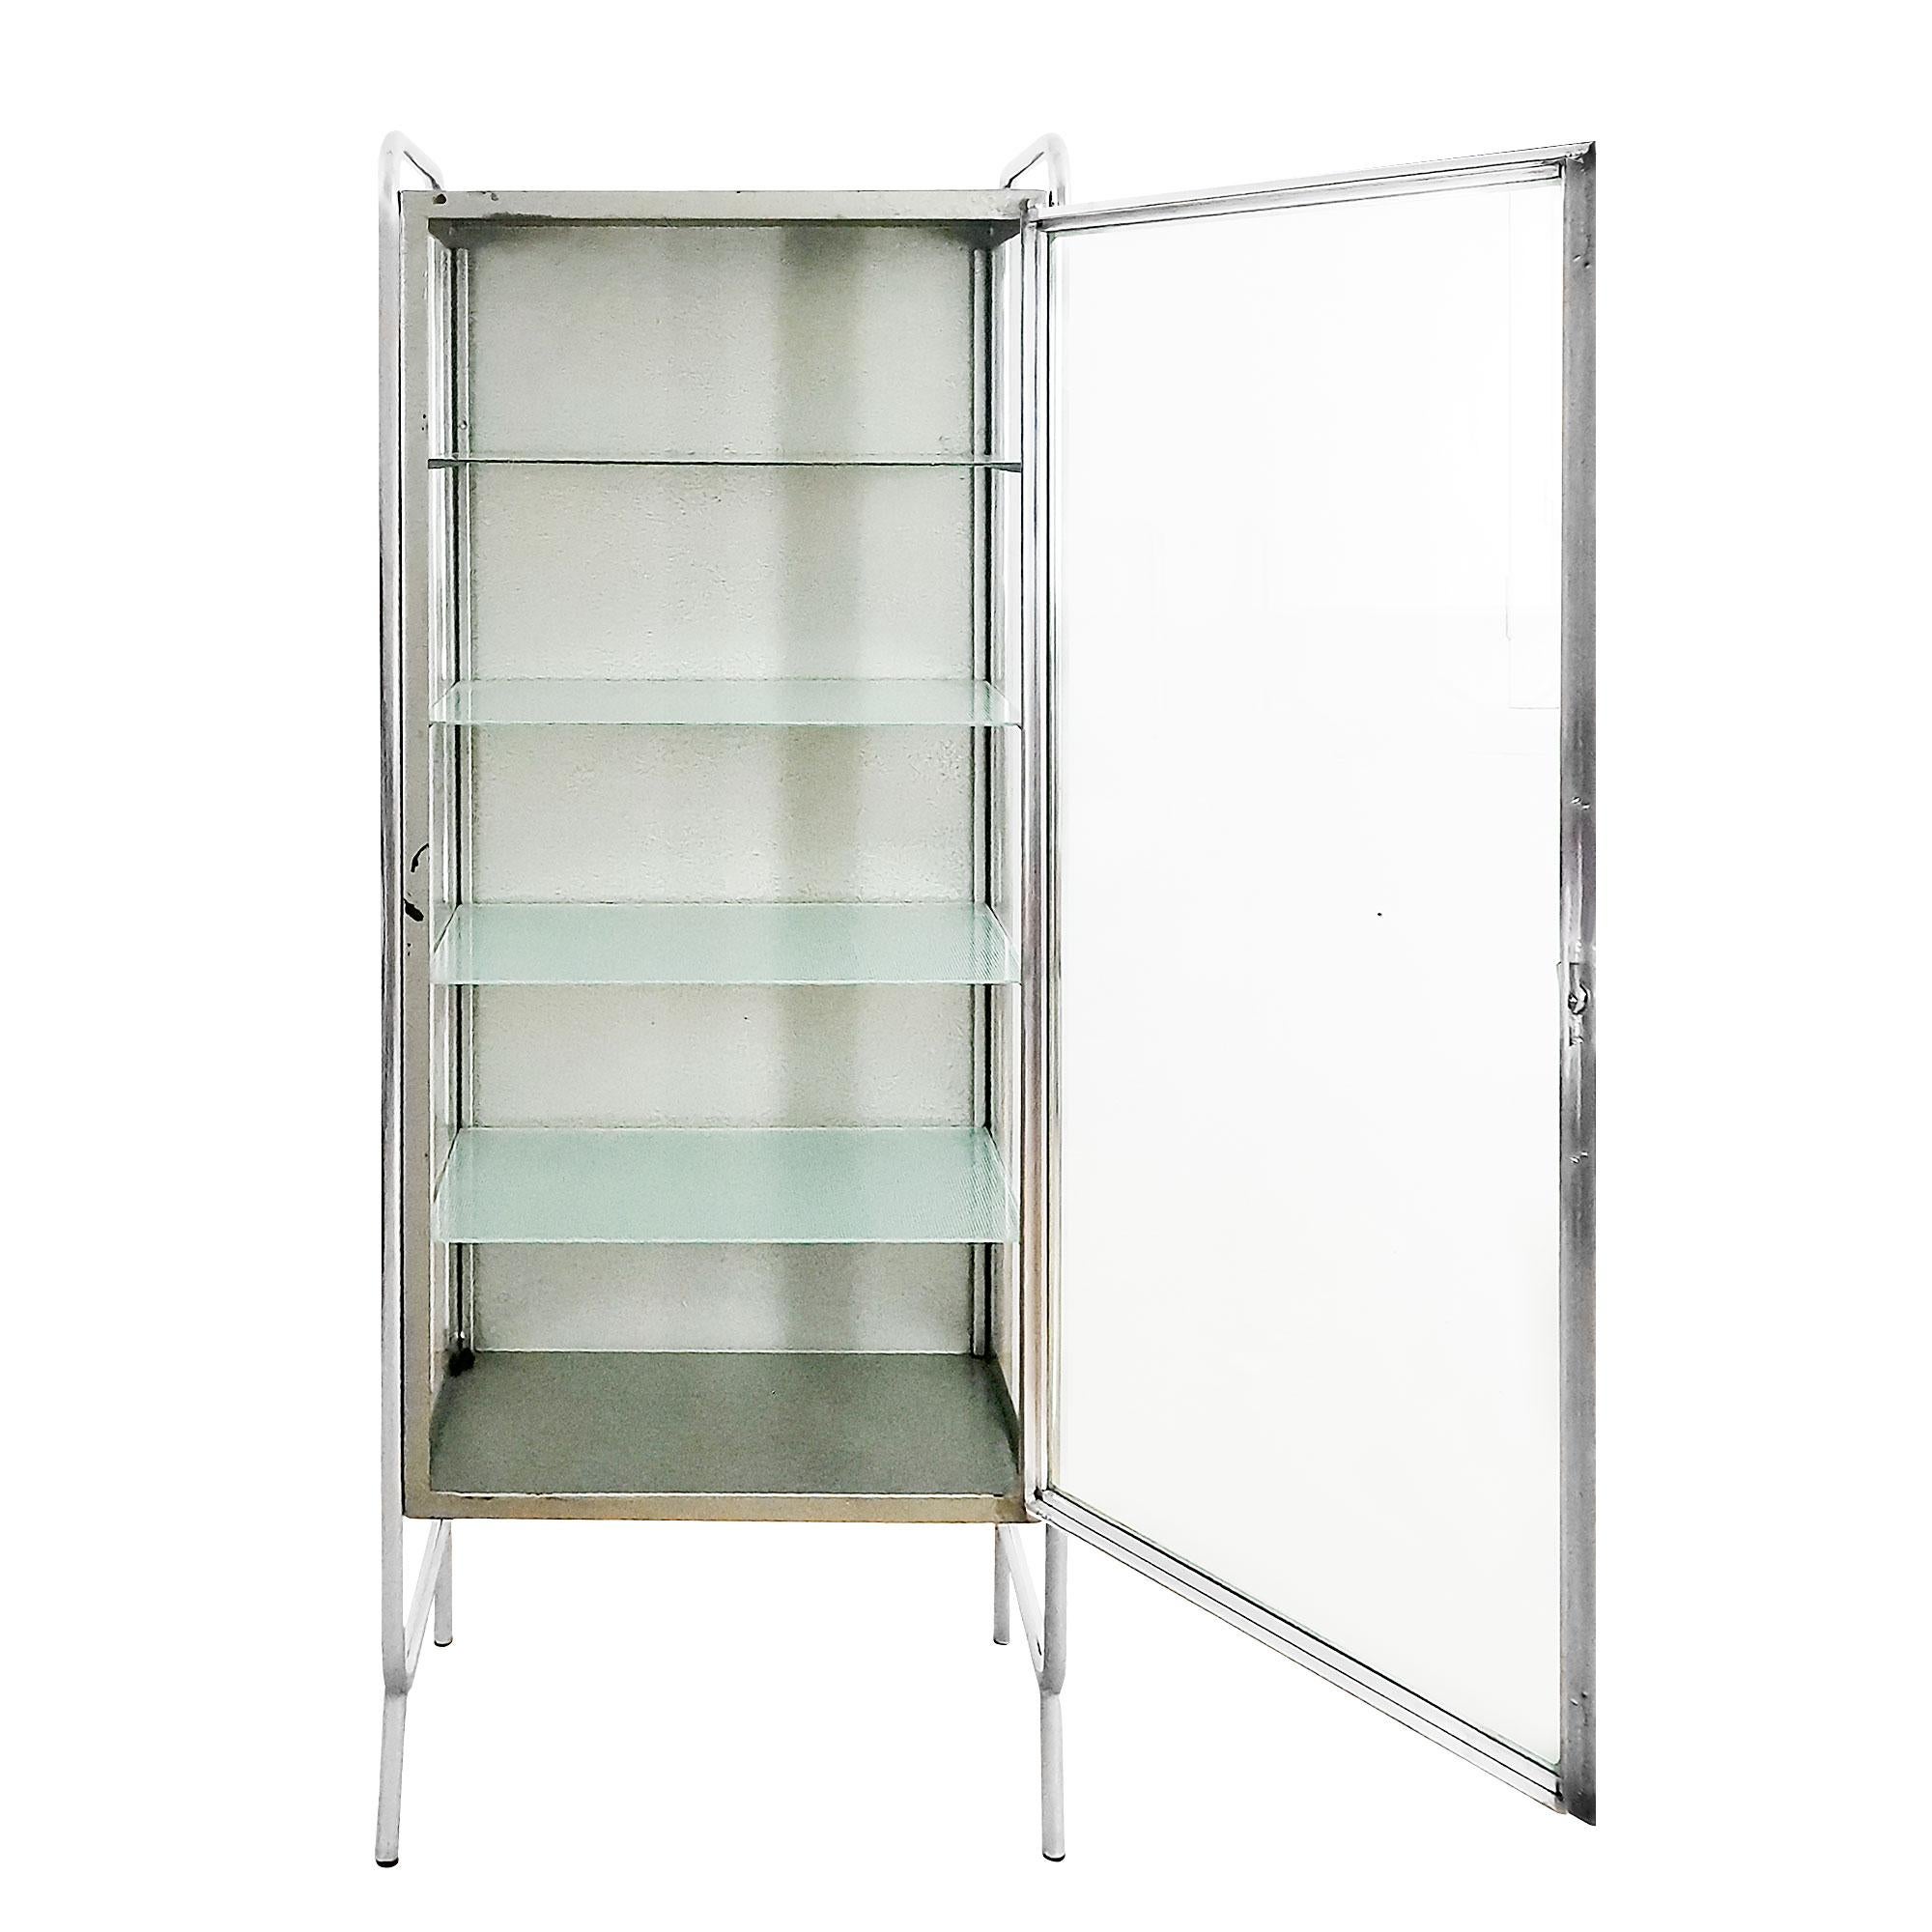 Medical display cabinet in steel painted with metallic green “hammered” paint. Base and door in polished aluminium. Original glass shelves. Lock and its two keys in perfect condition.

Italy c. 1945-50.